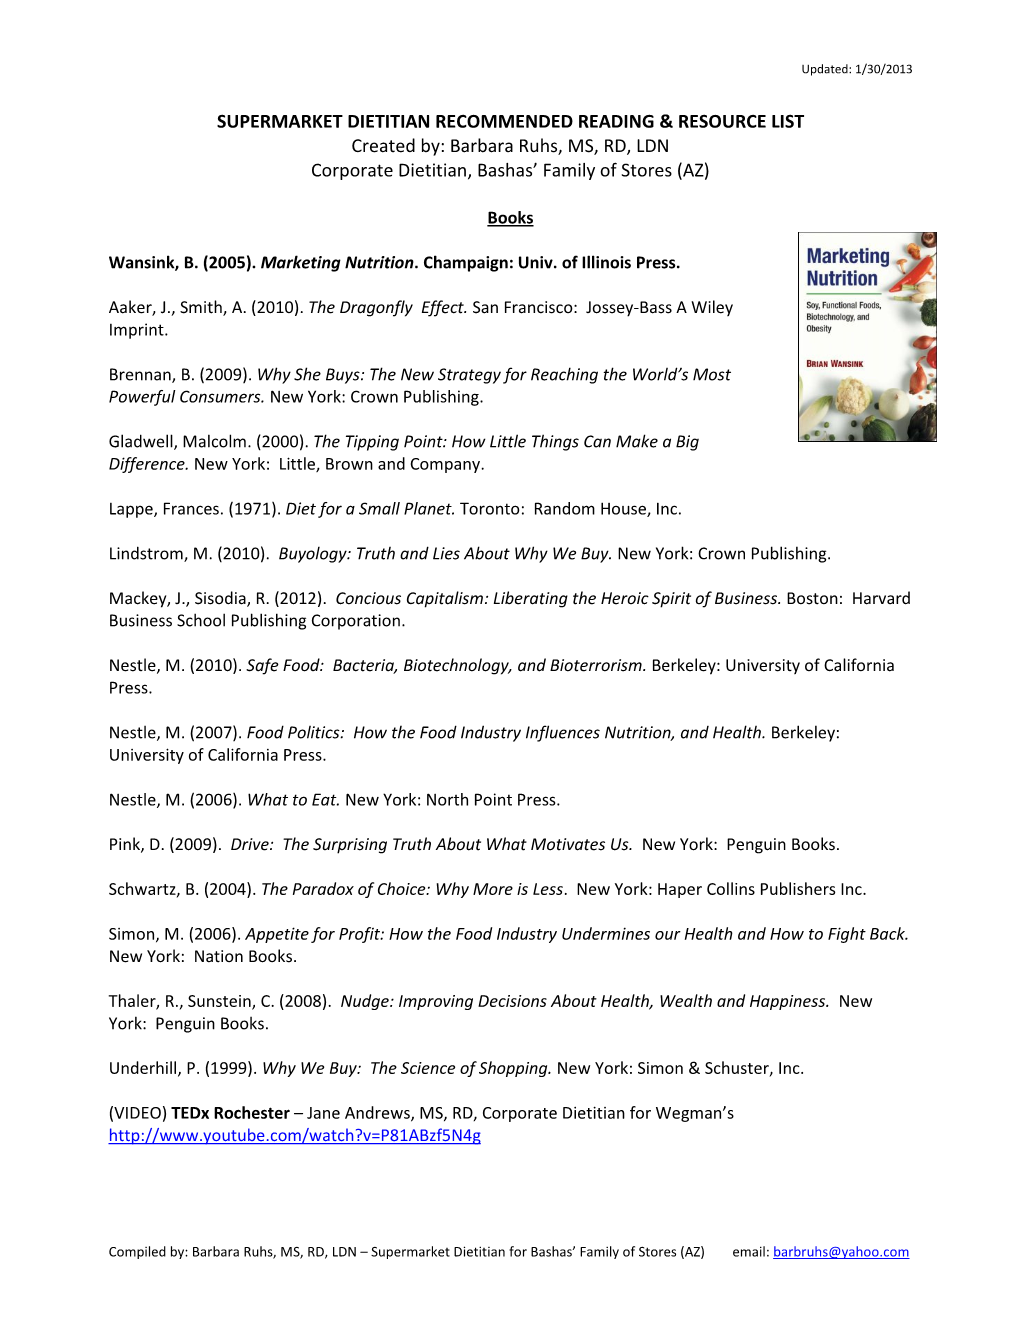 SUPERMARKET DIETITIAN RECOMMENDED READING & RESOURCE LIST Created By: Barbara Ruhs, MS, RD, LDN Corporate Dietitian, Bashas’ Family of Stores (AZ)